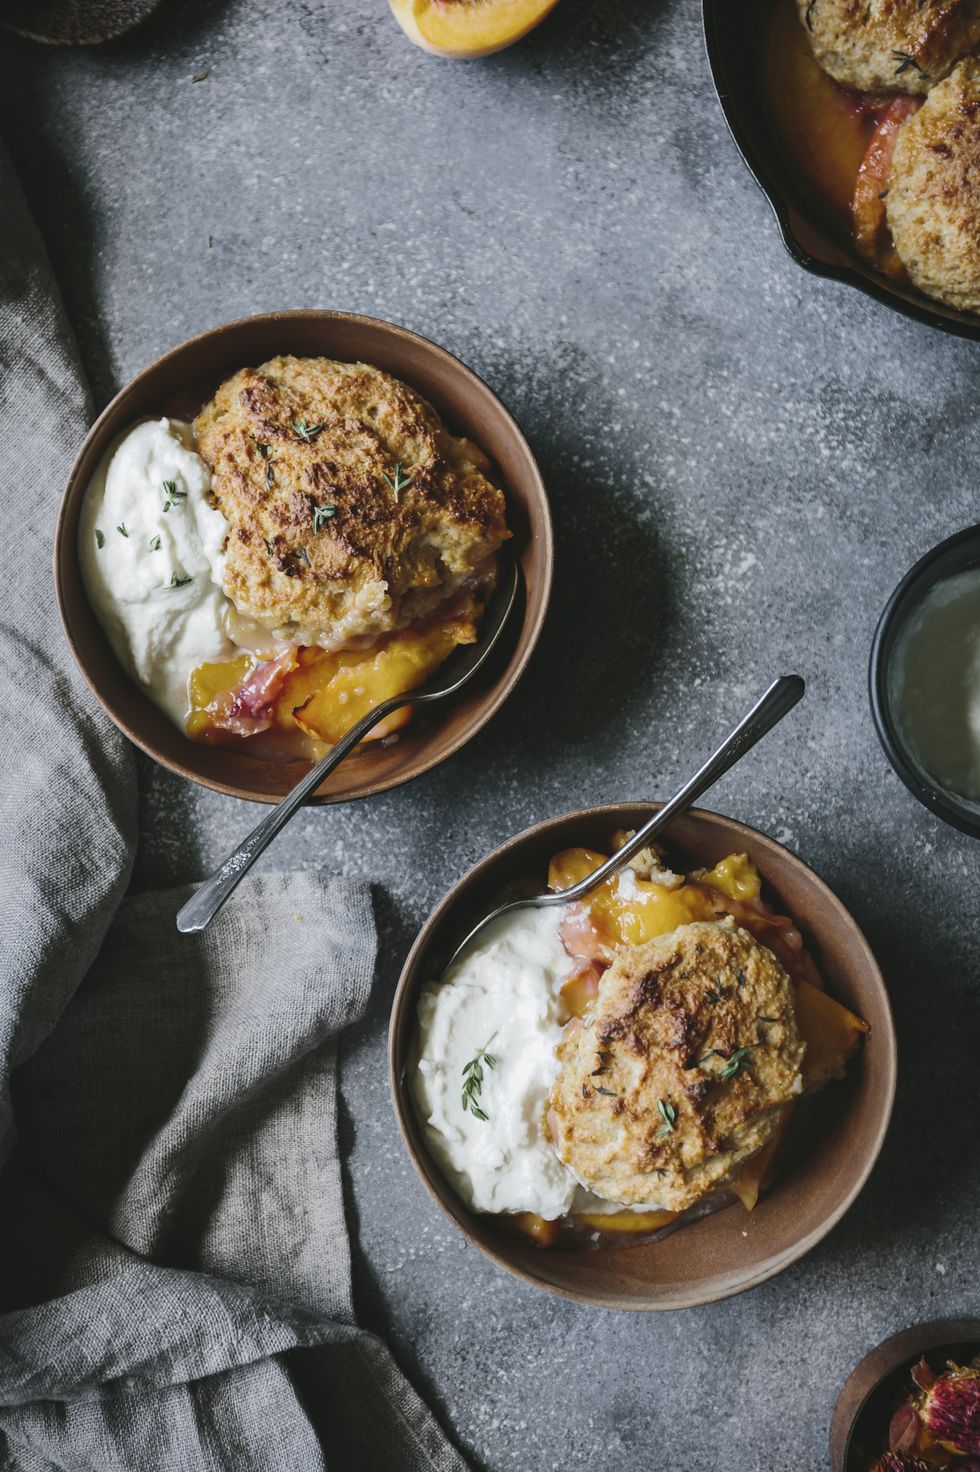 Two wood bowls filled with peach cobbler and honey swirled ricotta and thyme are photographed from the top view.